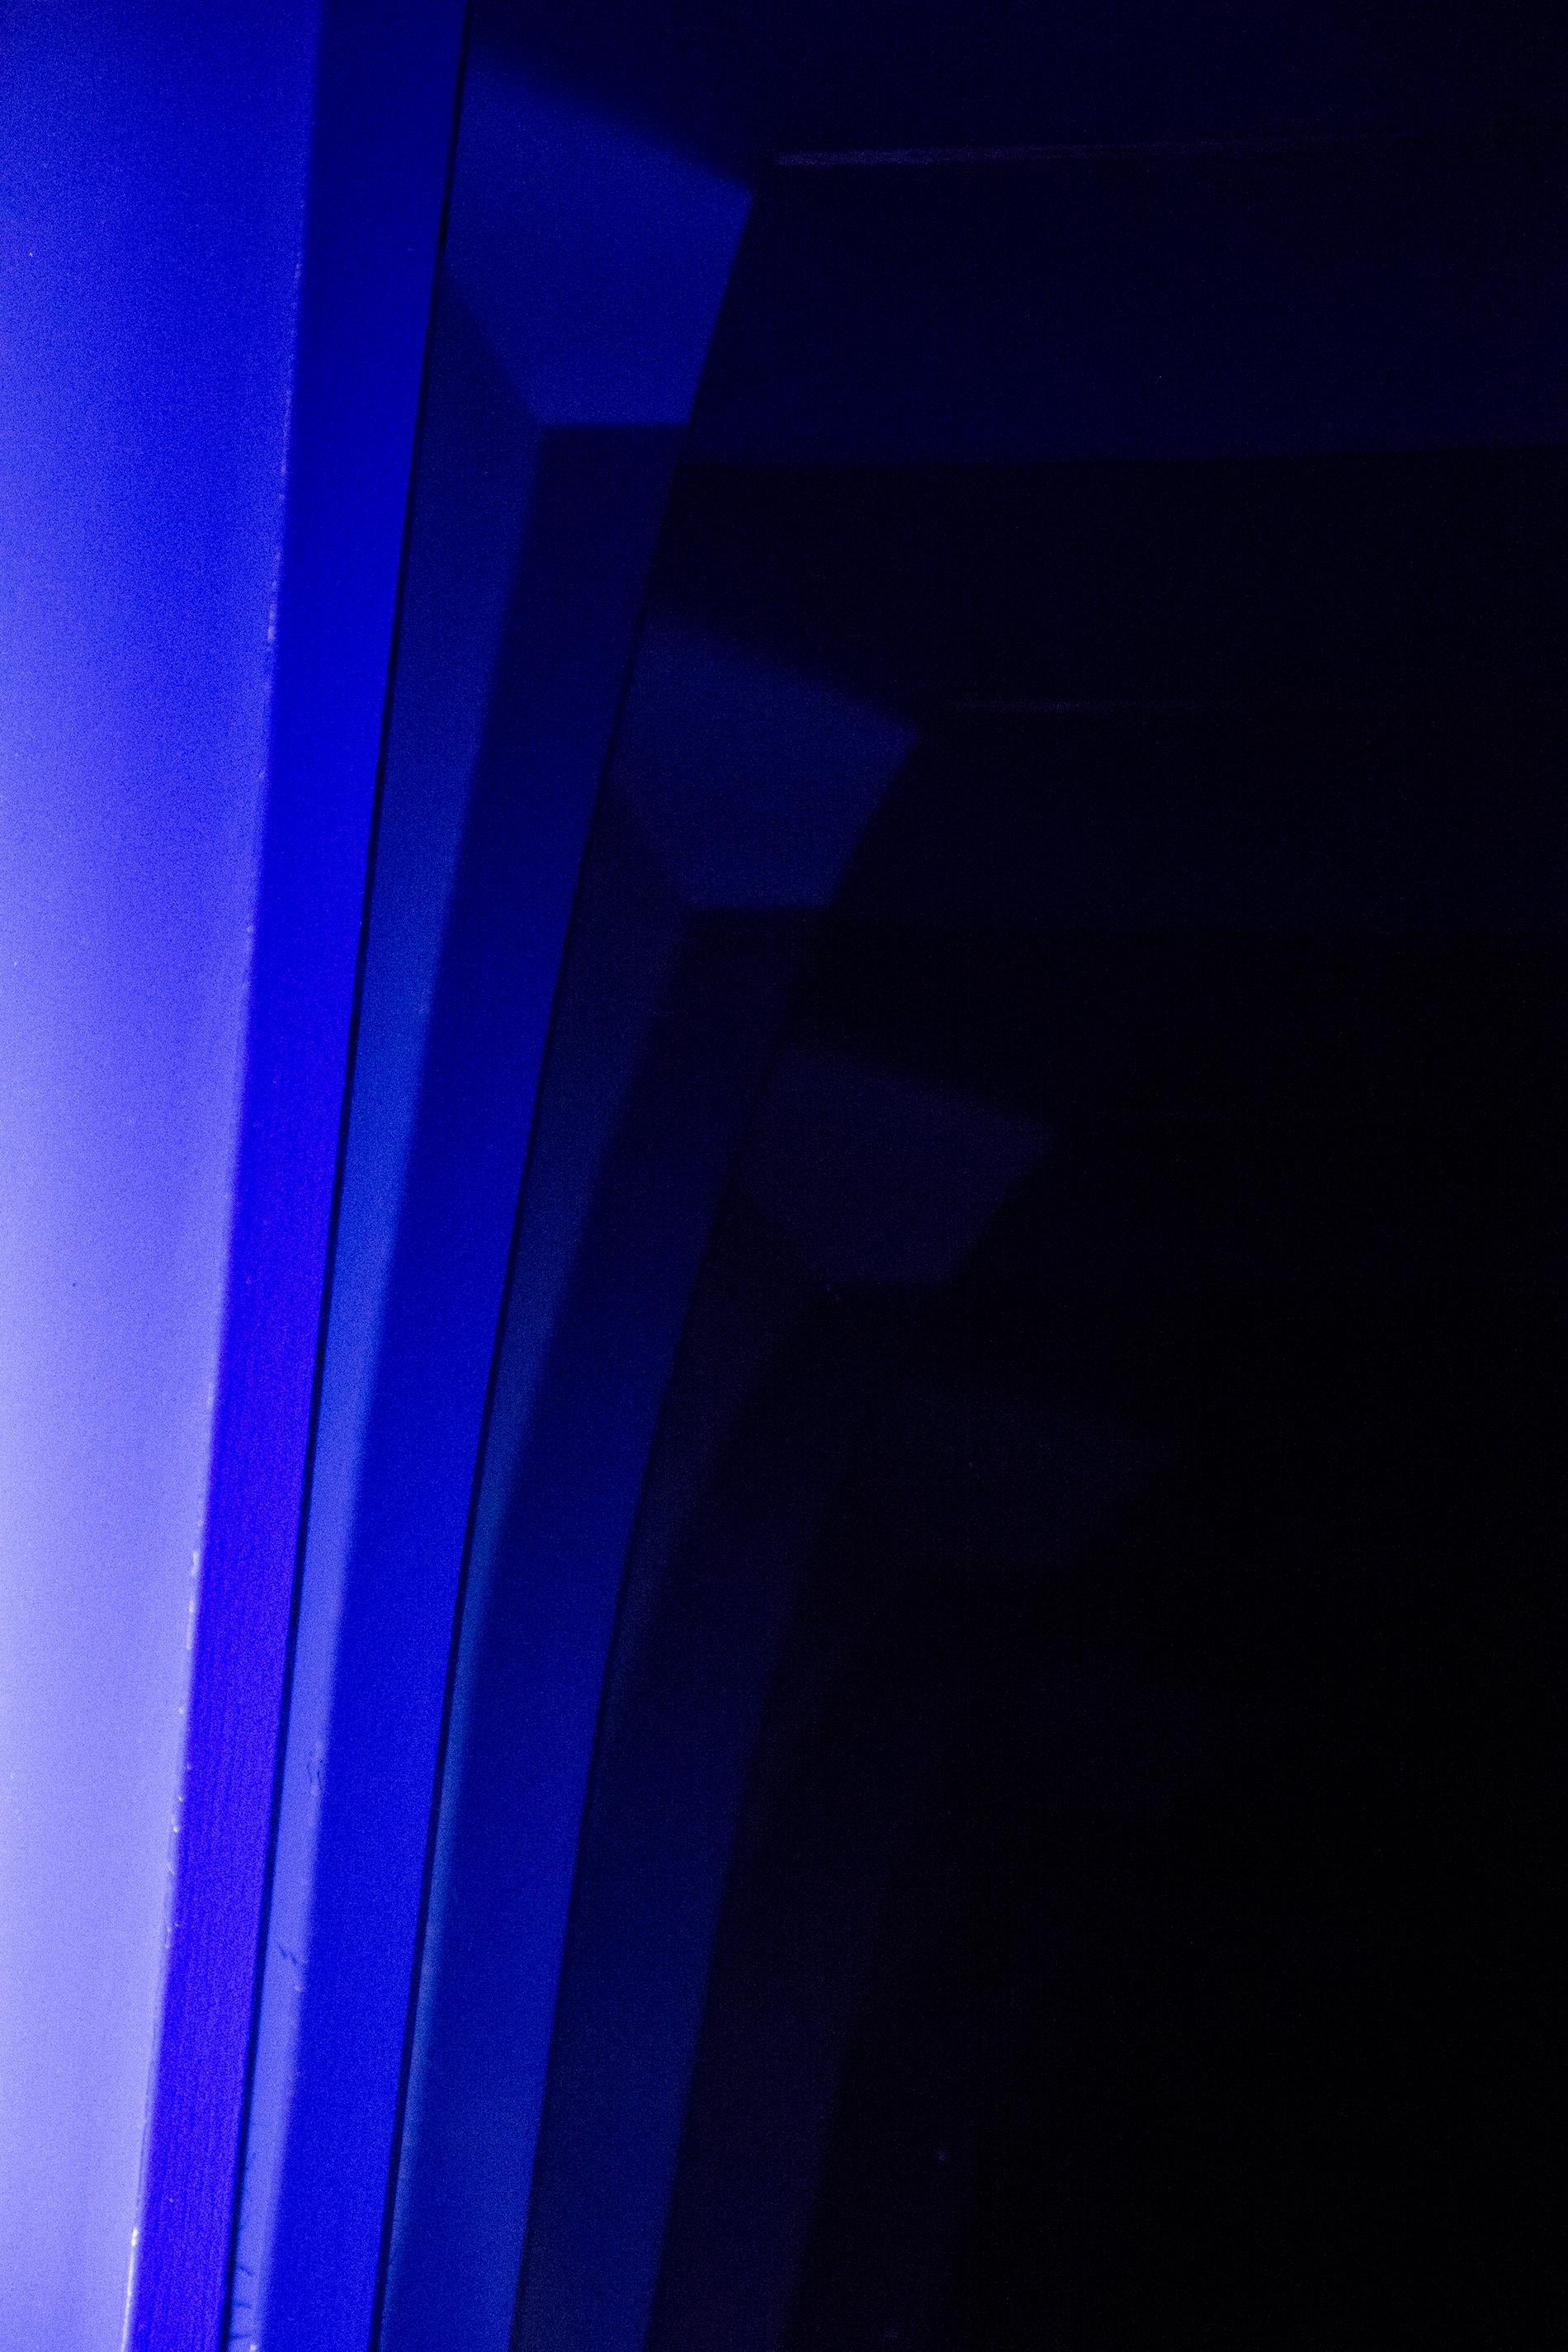 Bent Blue - glowing, illuminated, symmetrical, geometric forms in electric blue 3